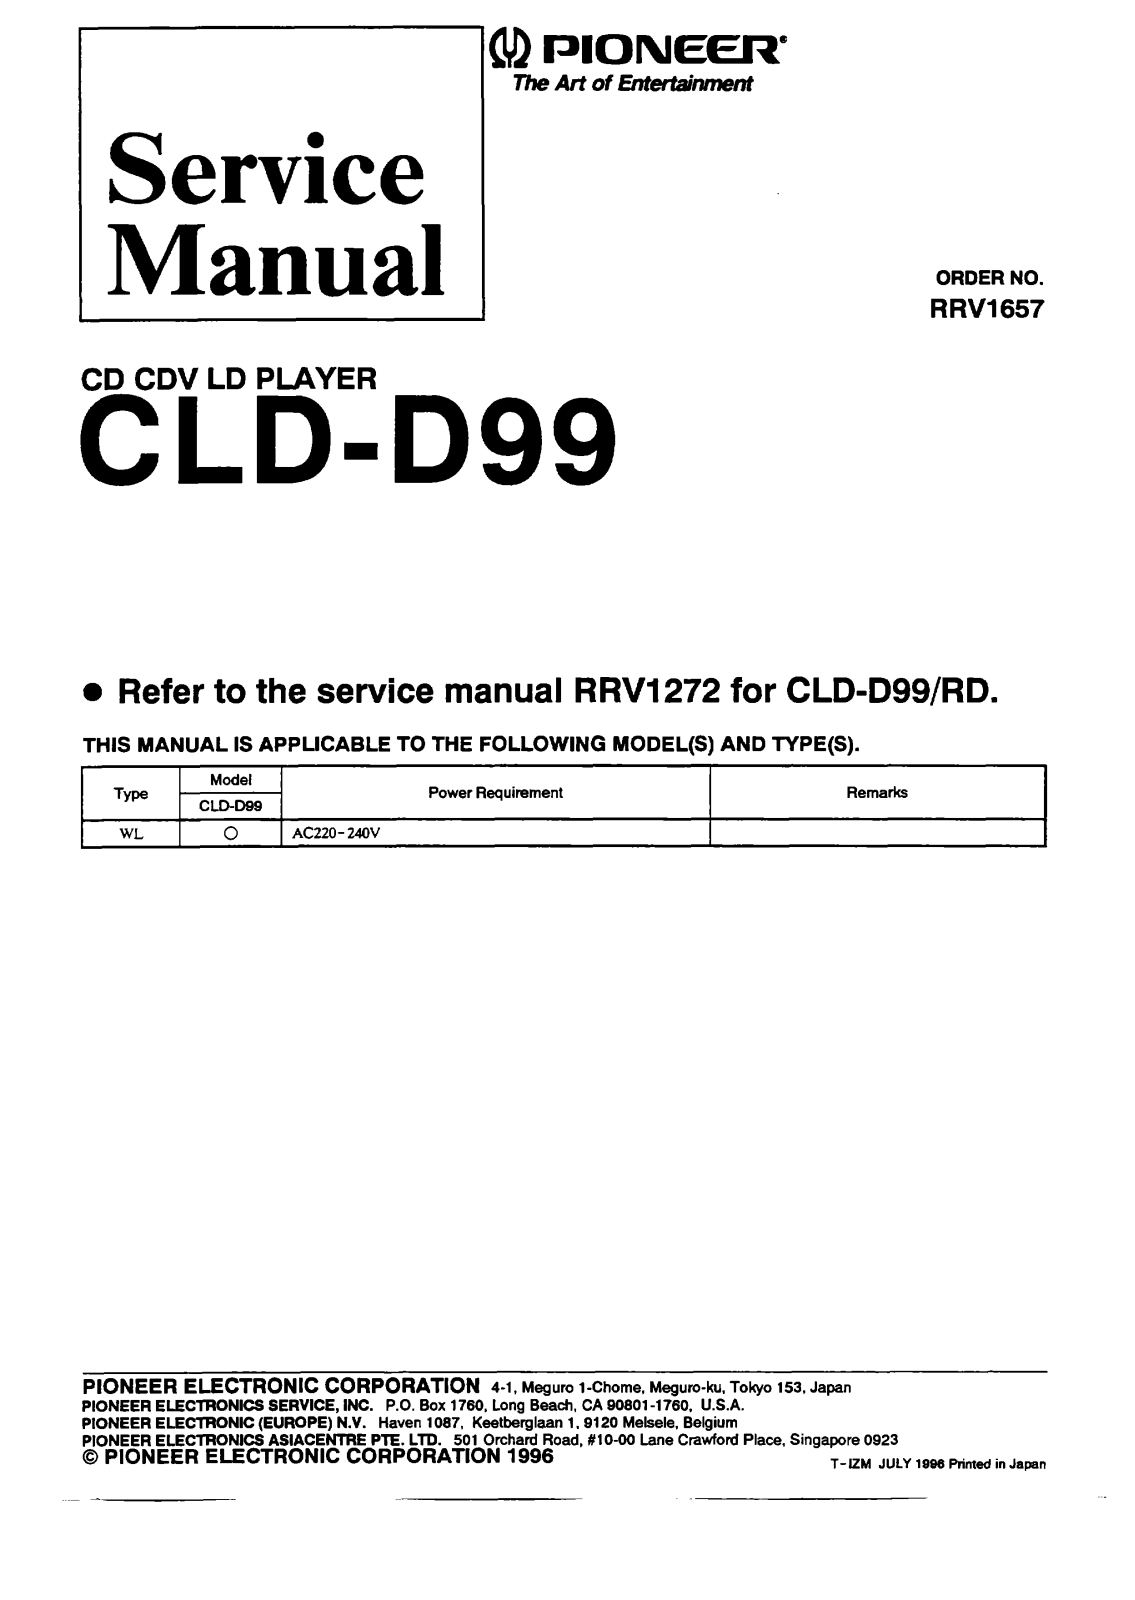 Pioneer CLD-D99 Service manual